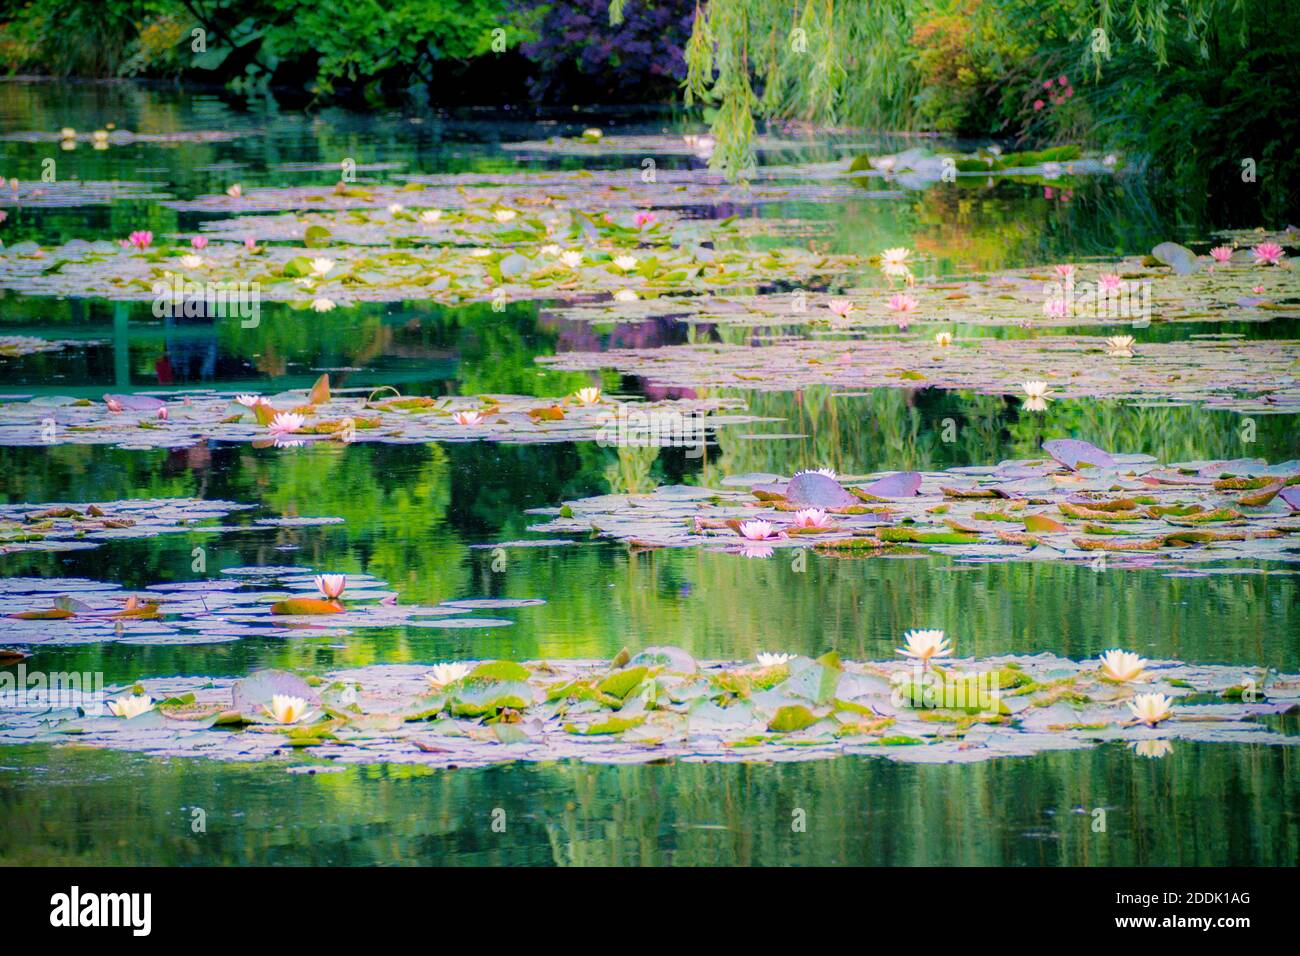 Les Jardins de Monet à Giverny - Monet's Garden - House and water lily gardens of French artist Claude Monet in Giverny, France Stock Photo